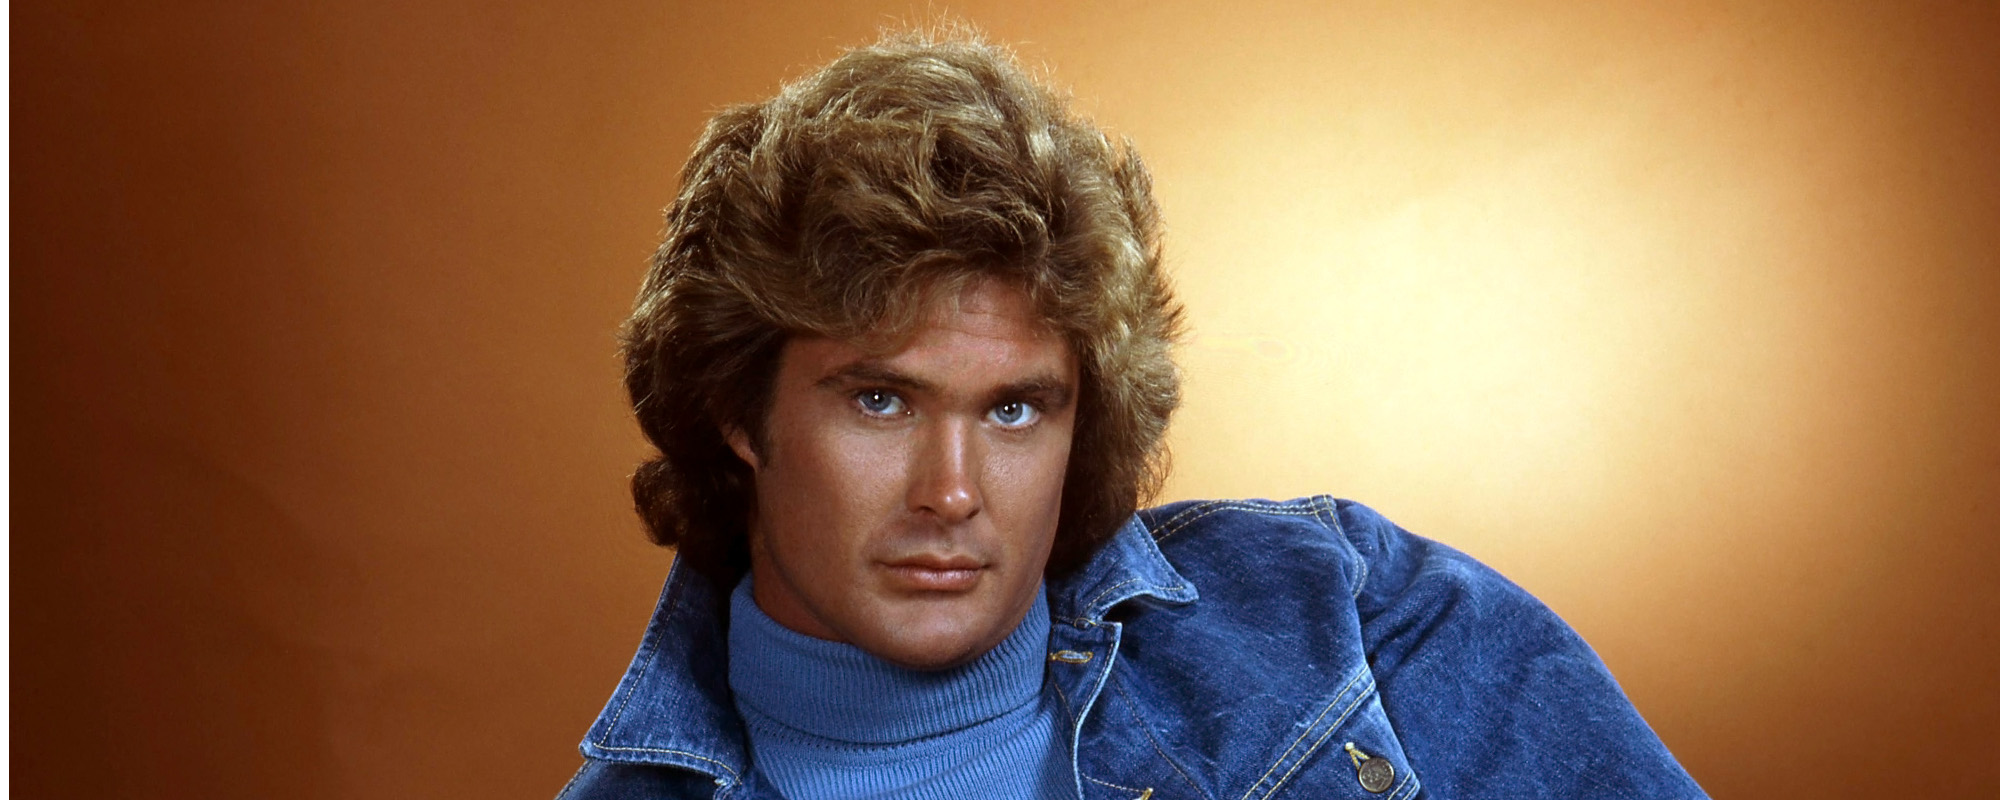 4 Songs You Didn’t Know David Hasselhoff Wrote